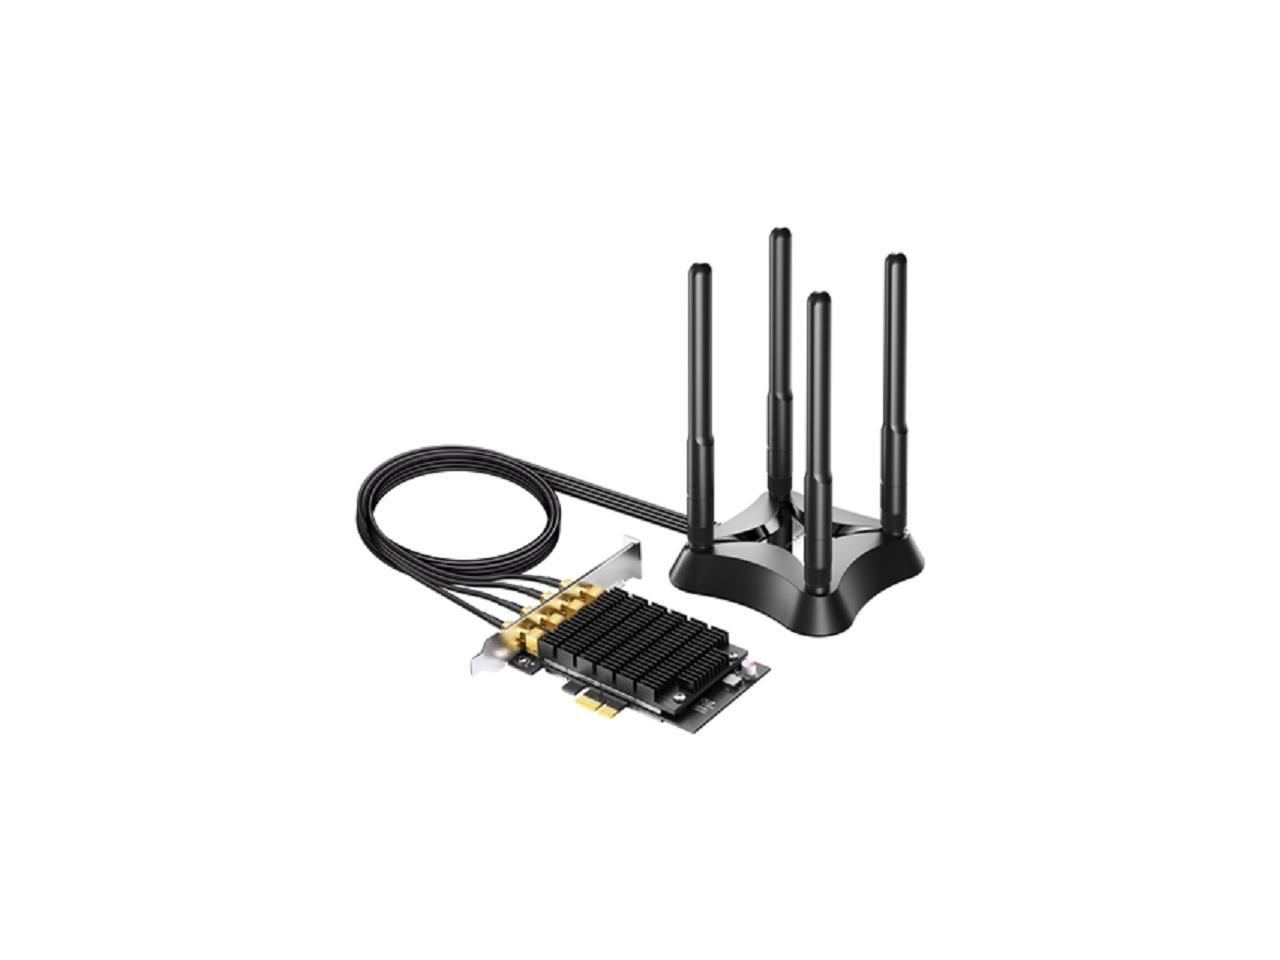 asus driver download for wireless adapter